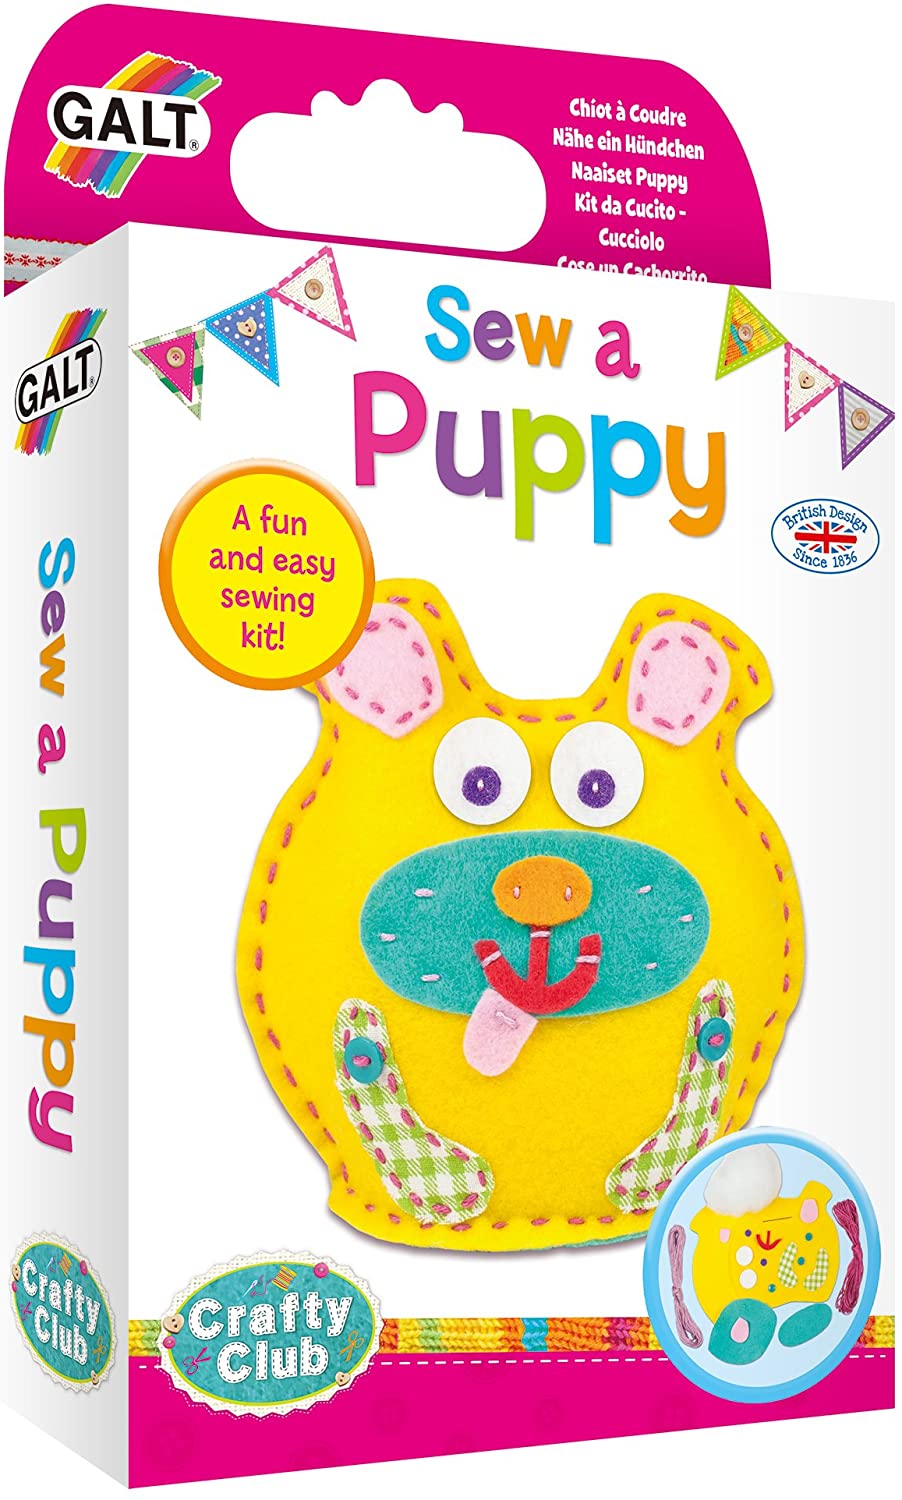 Galt sew a puppy kit The Bubble Room Toy Store Skerries Dublin